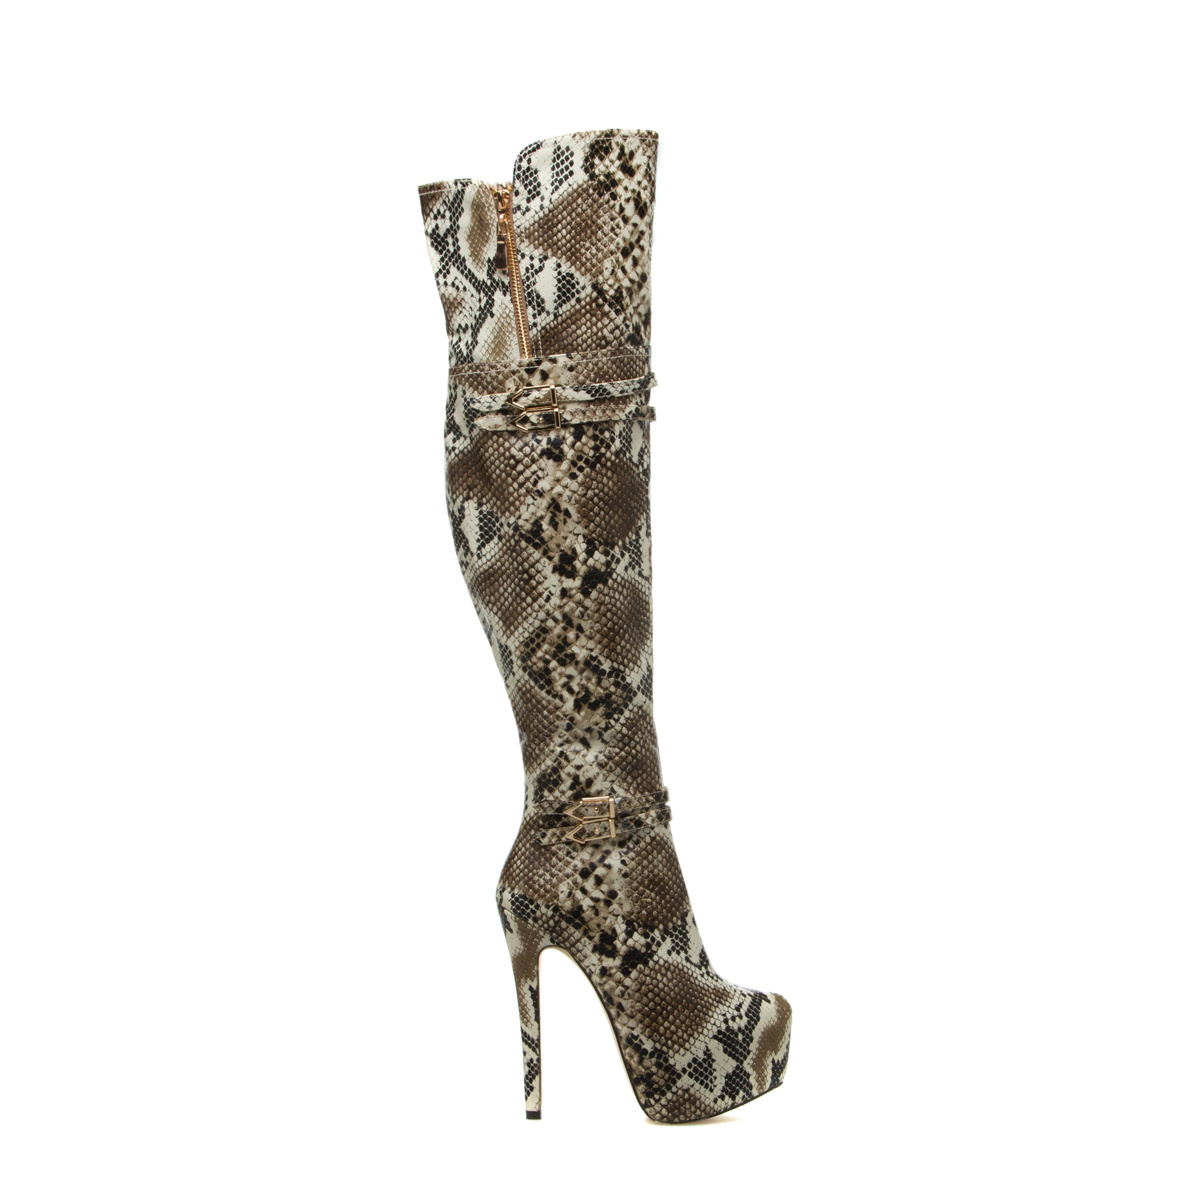 Round About - ShoeDazzle